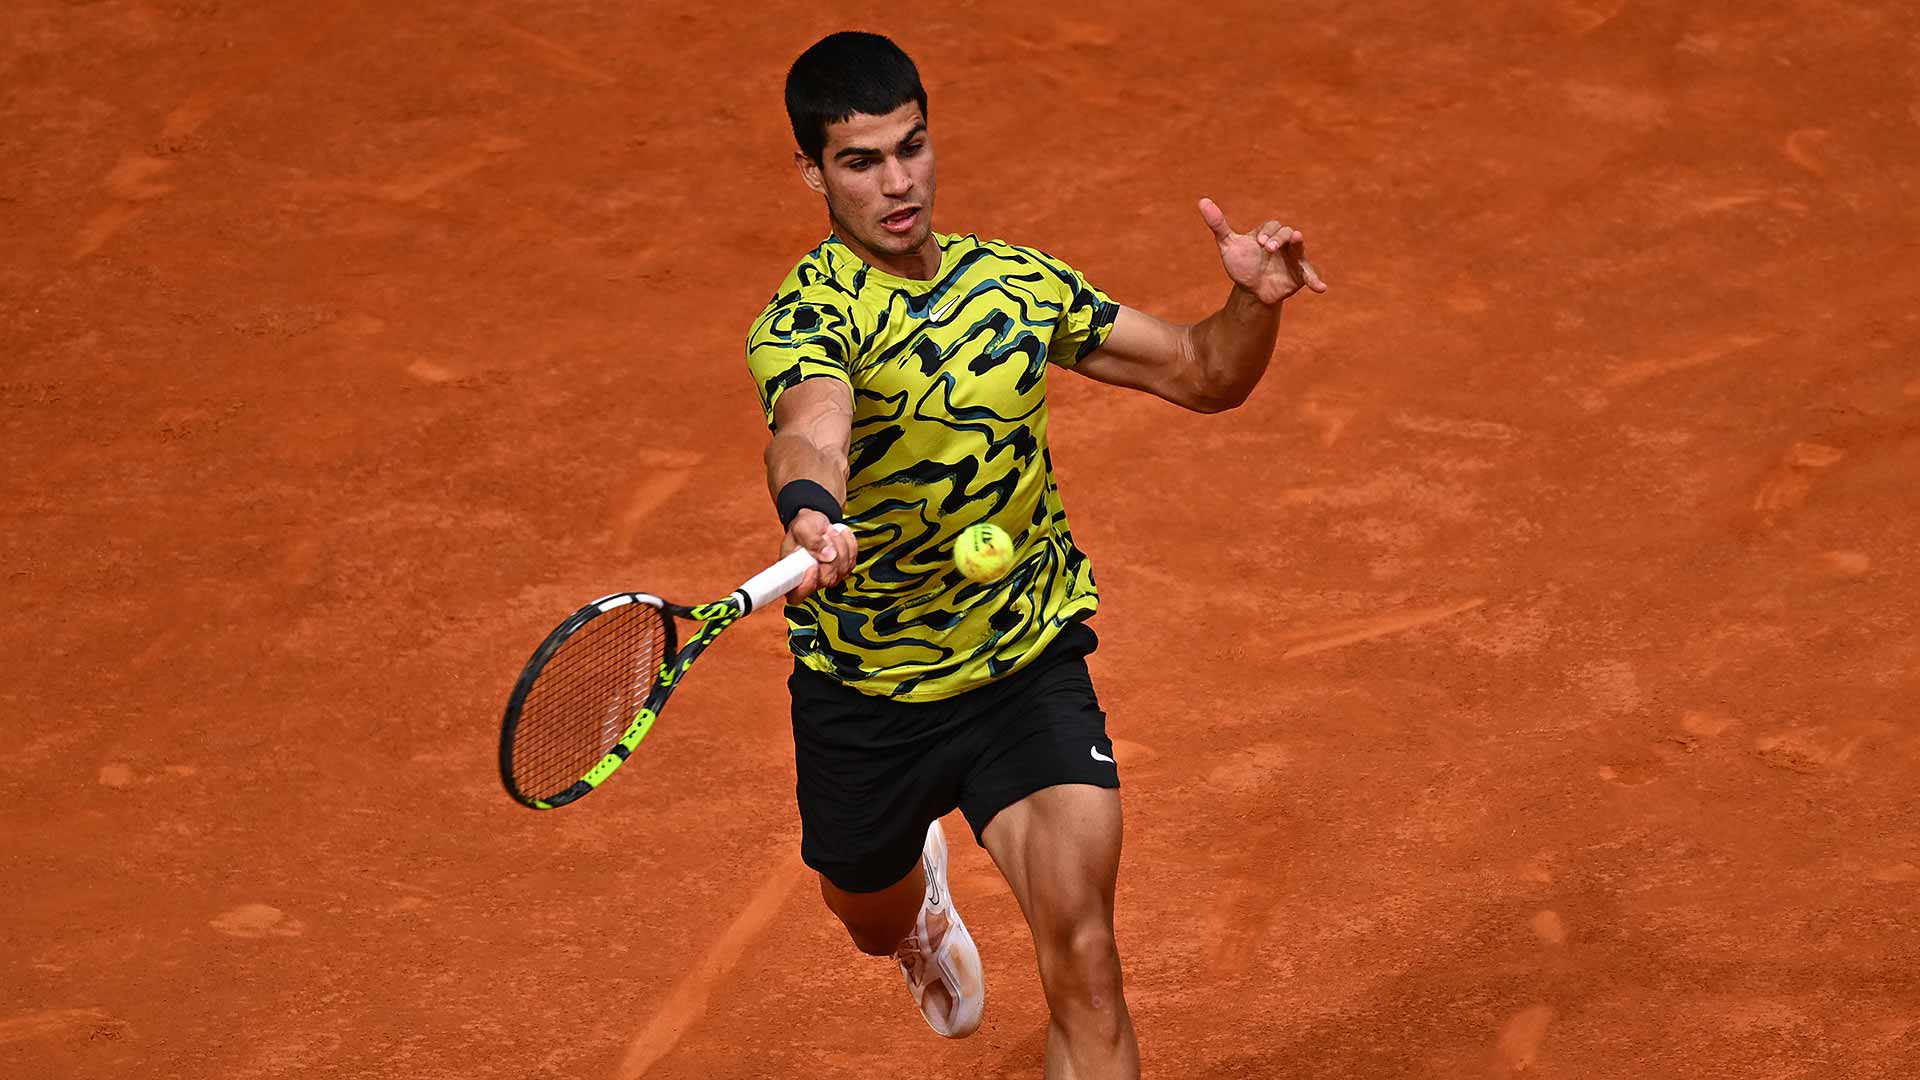 Carlos Alcaraz will compete on European clay for the first time this season in Madrid following injury.